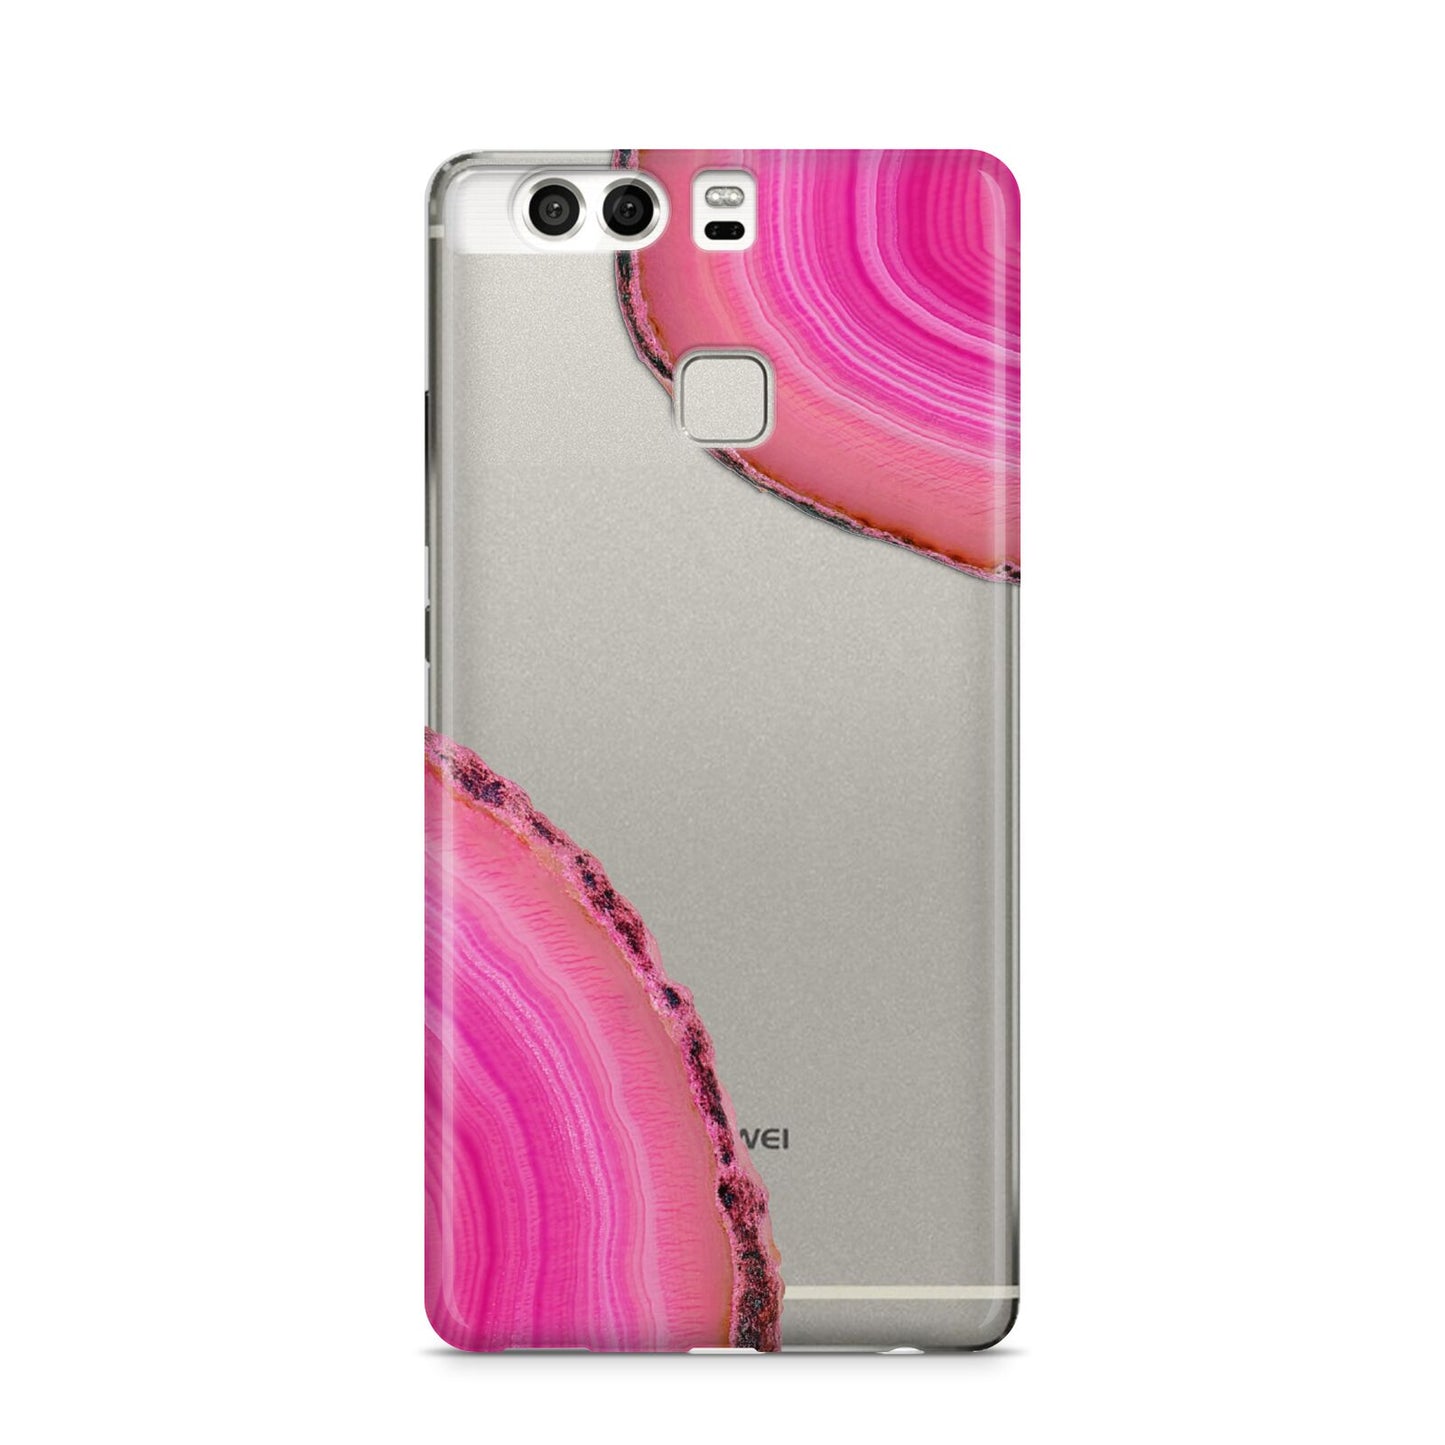 Agate Bright Pink Huawei P9 Case